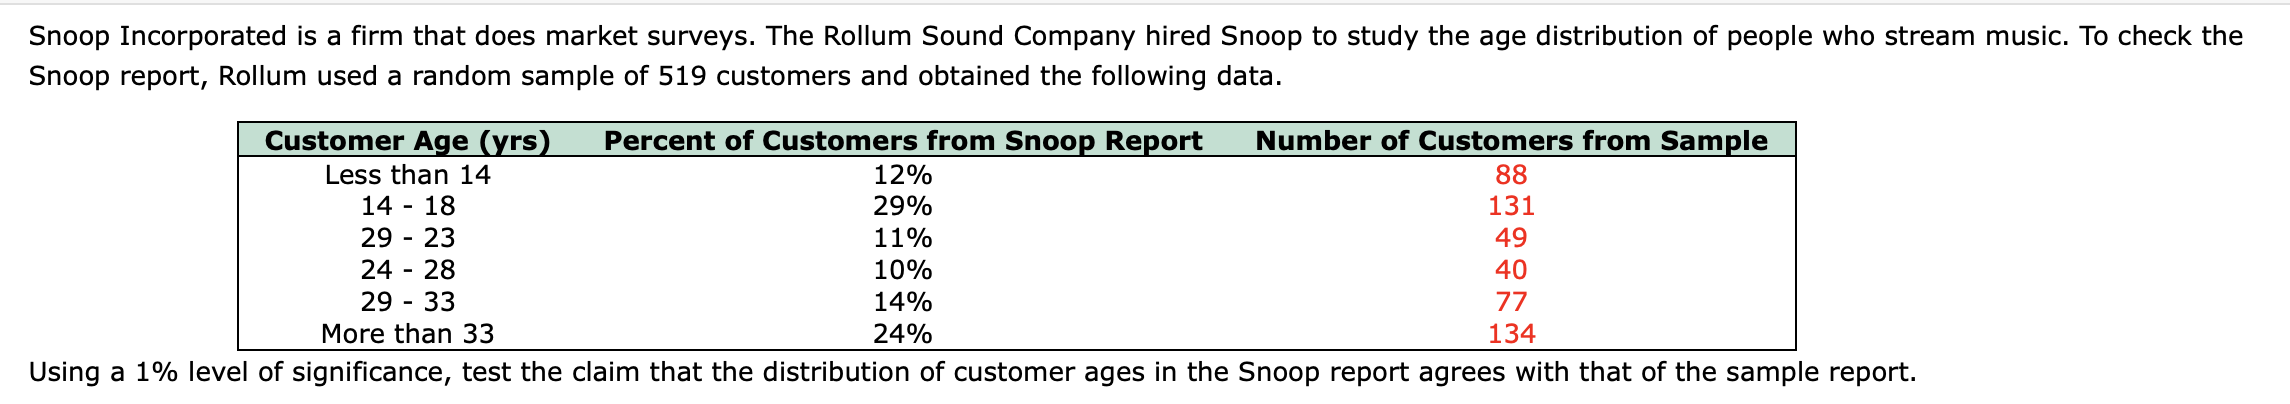 Snoop Incorporated is a firm that does market surveys. The Rollum Sound Company hired Snoop to study the age distribution of people who stream music. To check the
Snoop report, Rollum used a random sample of 519 customers and obtained the following data.
Customer Age (yrs)
Percent of Customers from Snoop Report
Number of Customers from Sample
Less than 14
12%
88
14 - 18
29%
131
29 - 23
11%
49
24 - 28
10%
40
29 - 33
14%
77
More than 33
24%
134
Using a 1% level of significance, test the claim that the distribution of customer ages in the Snoop report agrees with that of the sample report.
